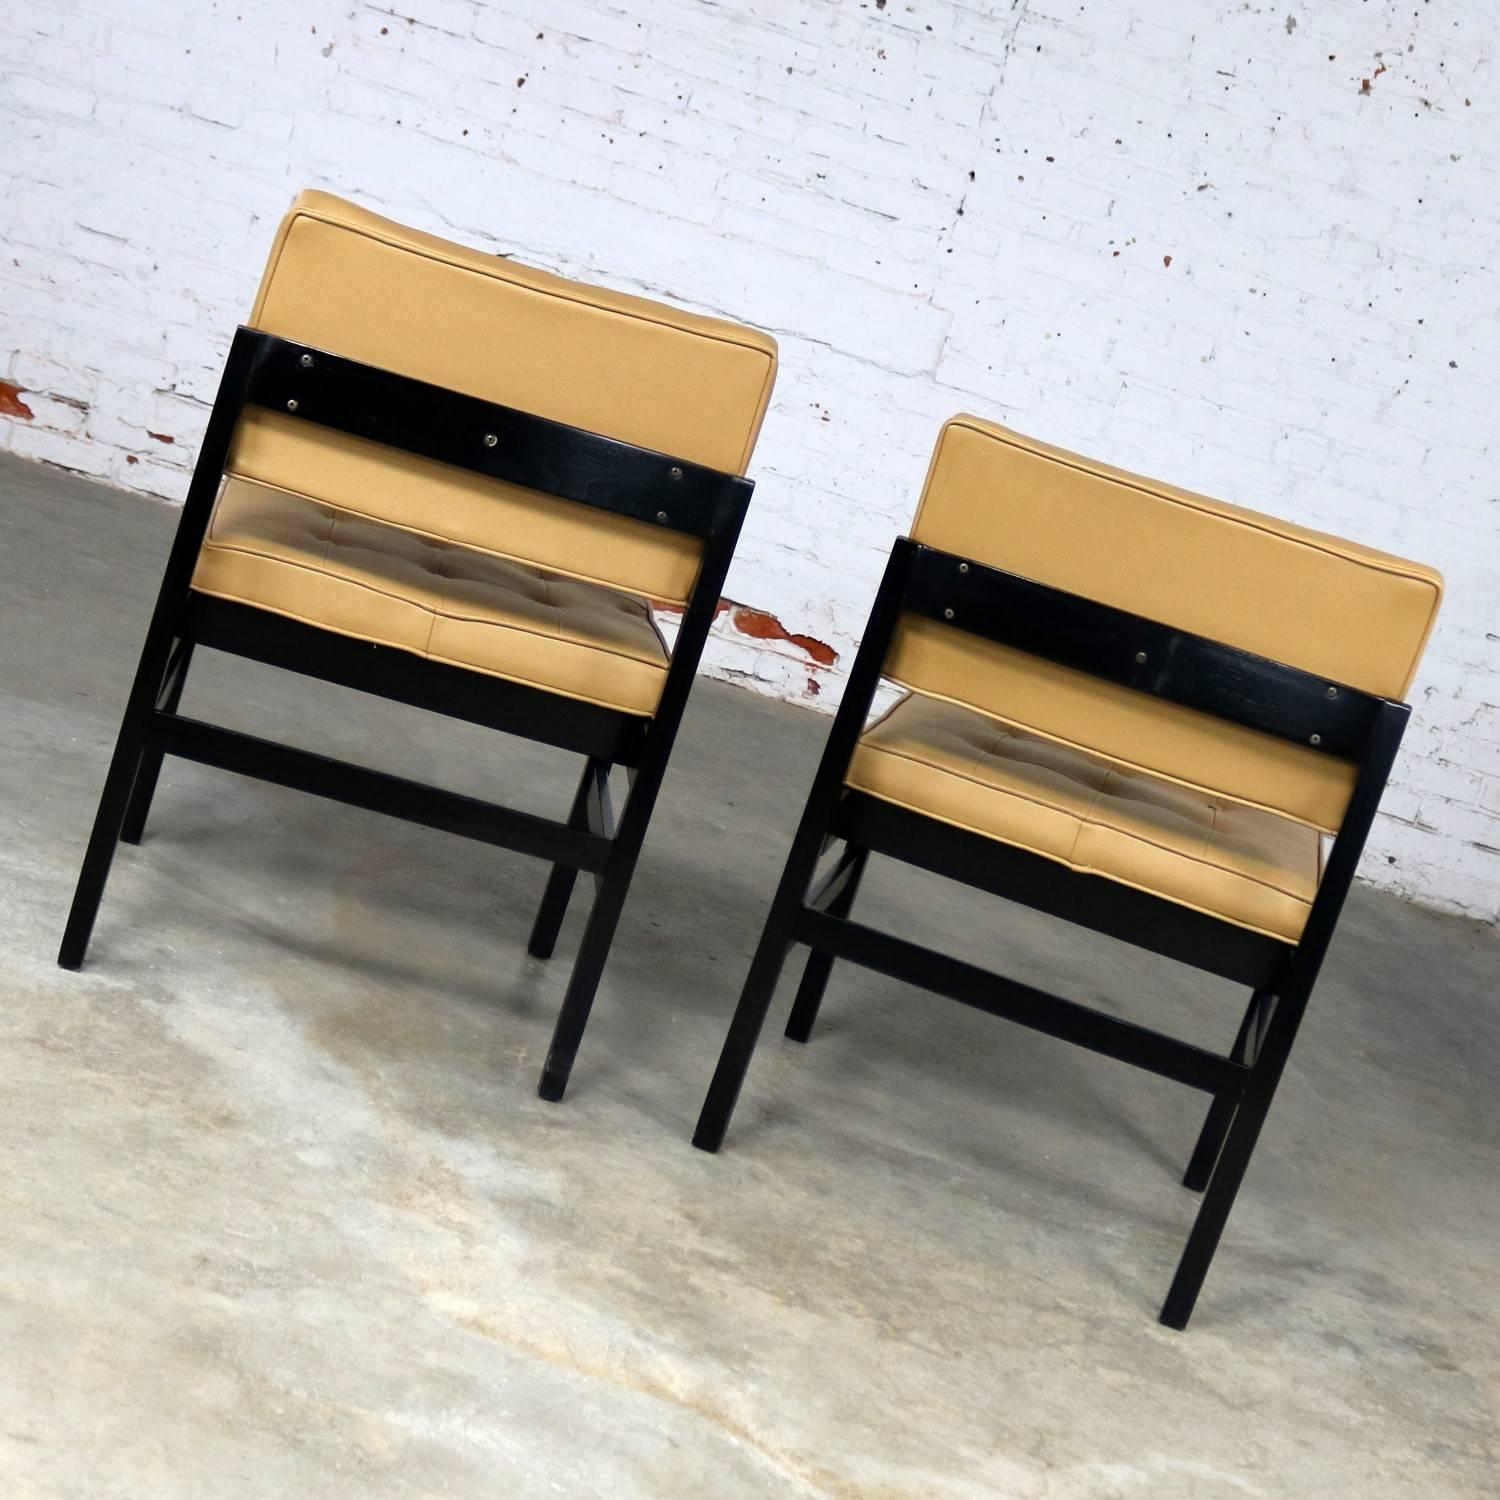 Pair of Hibriten Blackened Wood and Faux Leather Mid-Century Modern Chairs For Sale 3